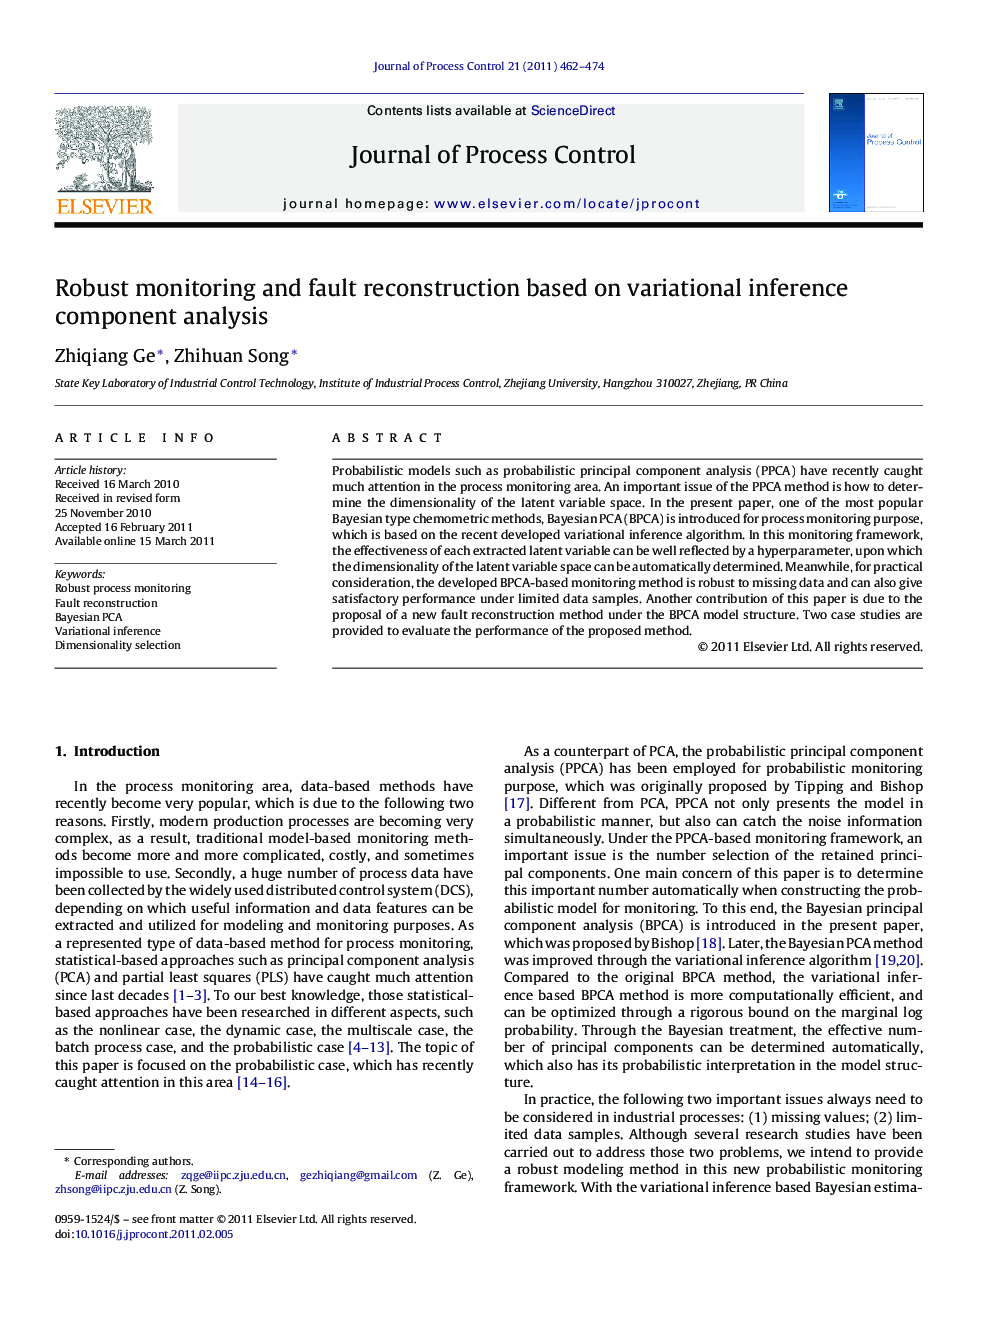 Robust monitoring and fault reconstruction based on variational inference component analysis